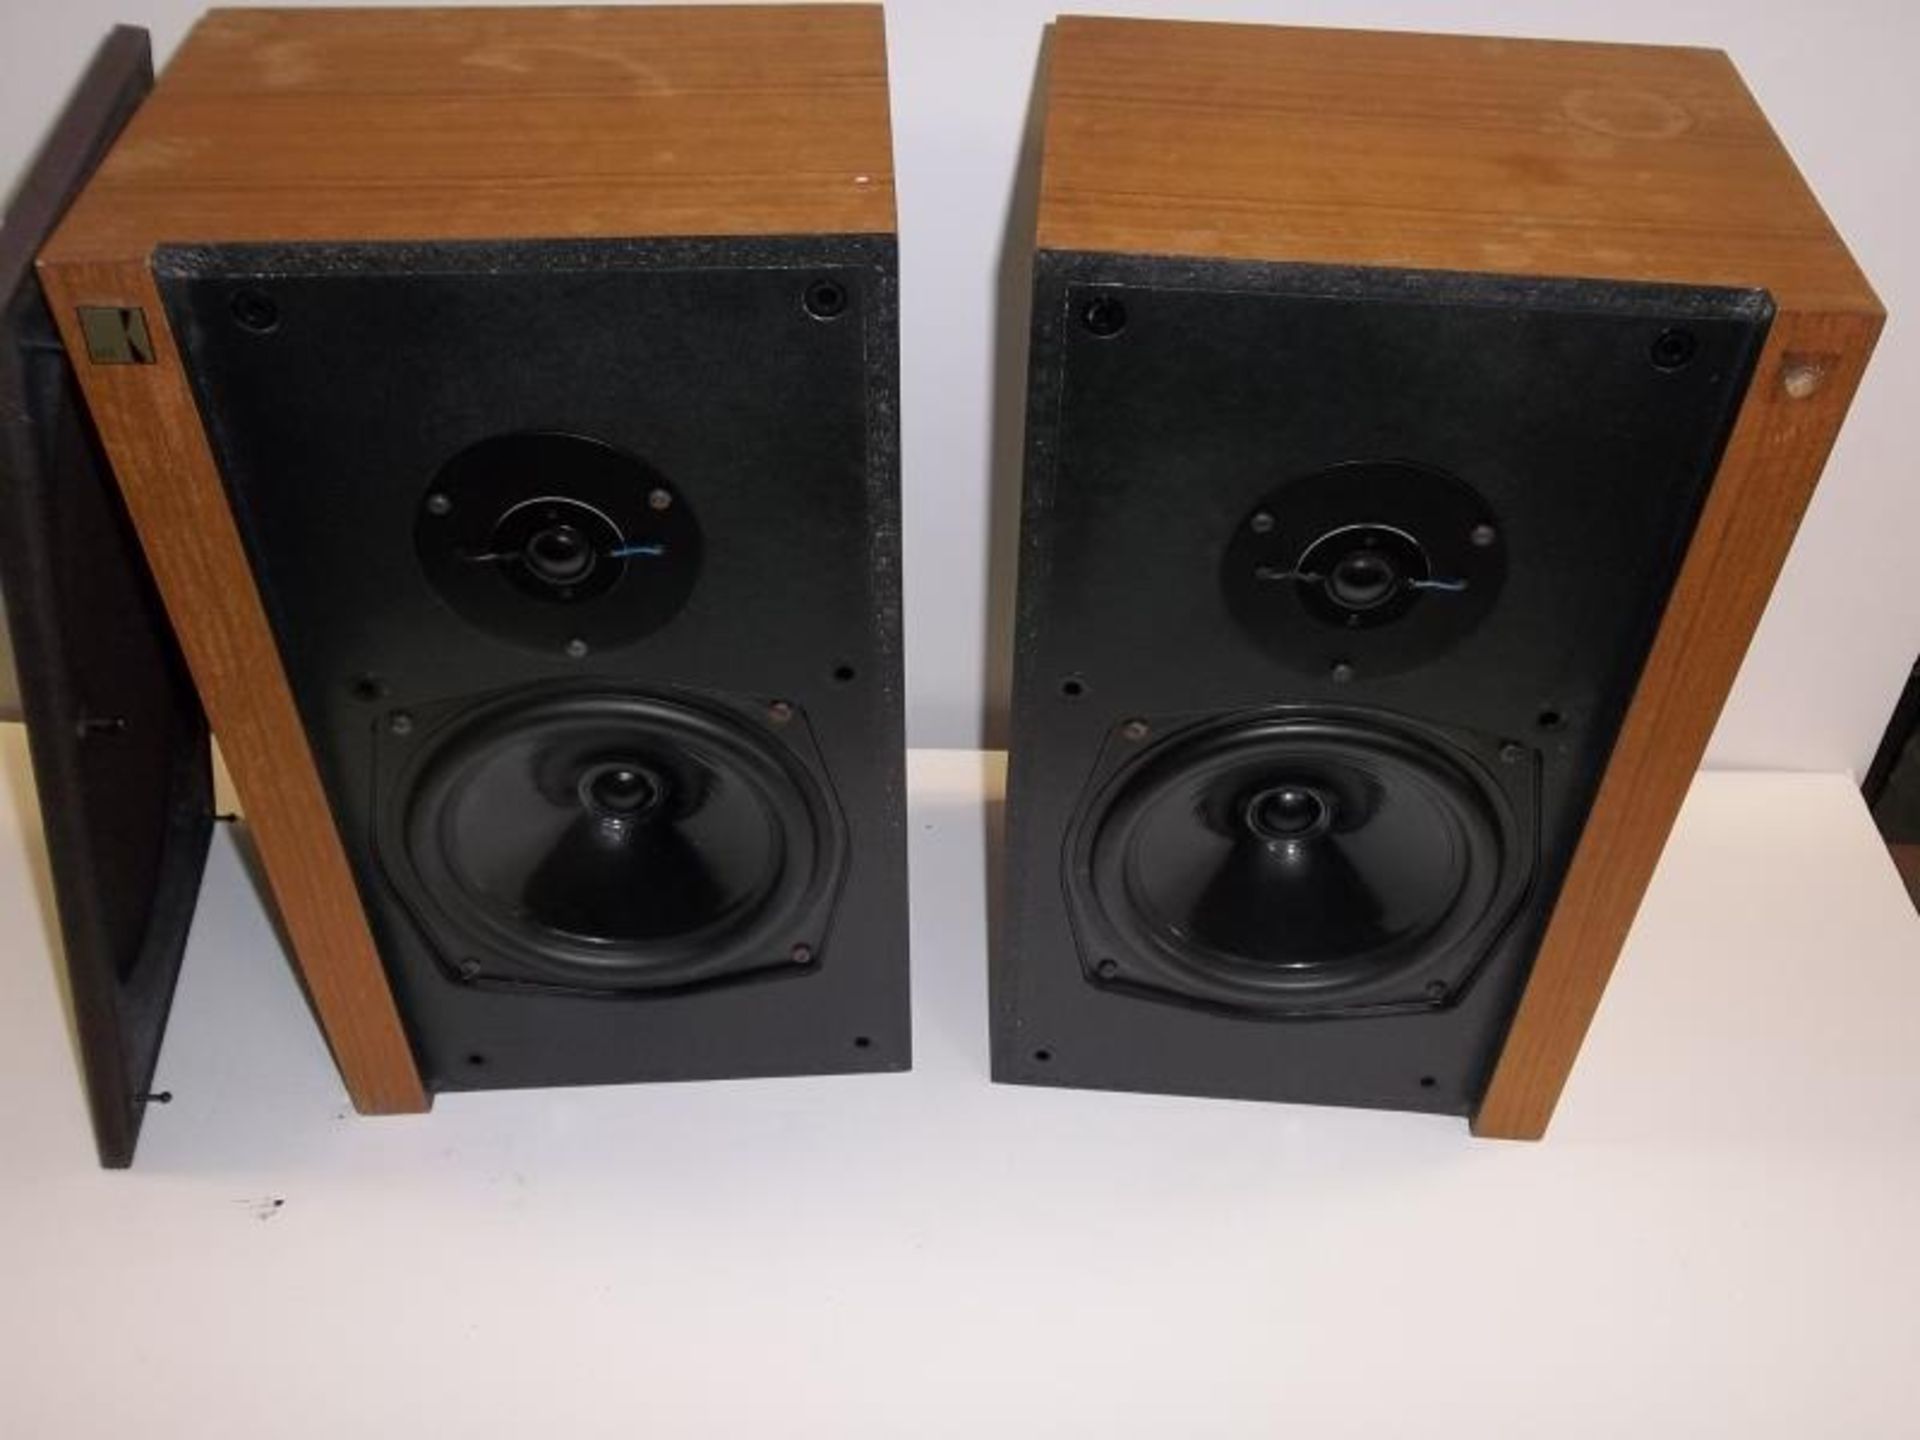 2 KEF Speakers, Corelli model 41693, 41694, missing KEF tag on corner, scratches and staining on - Image 2 of 3